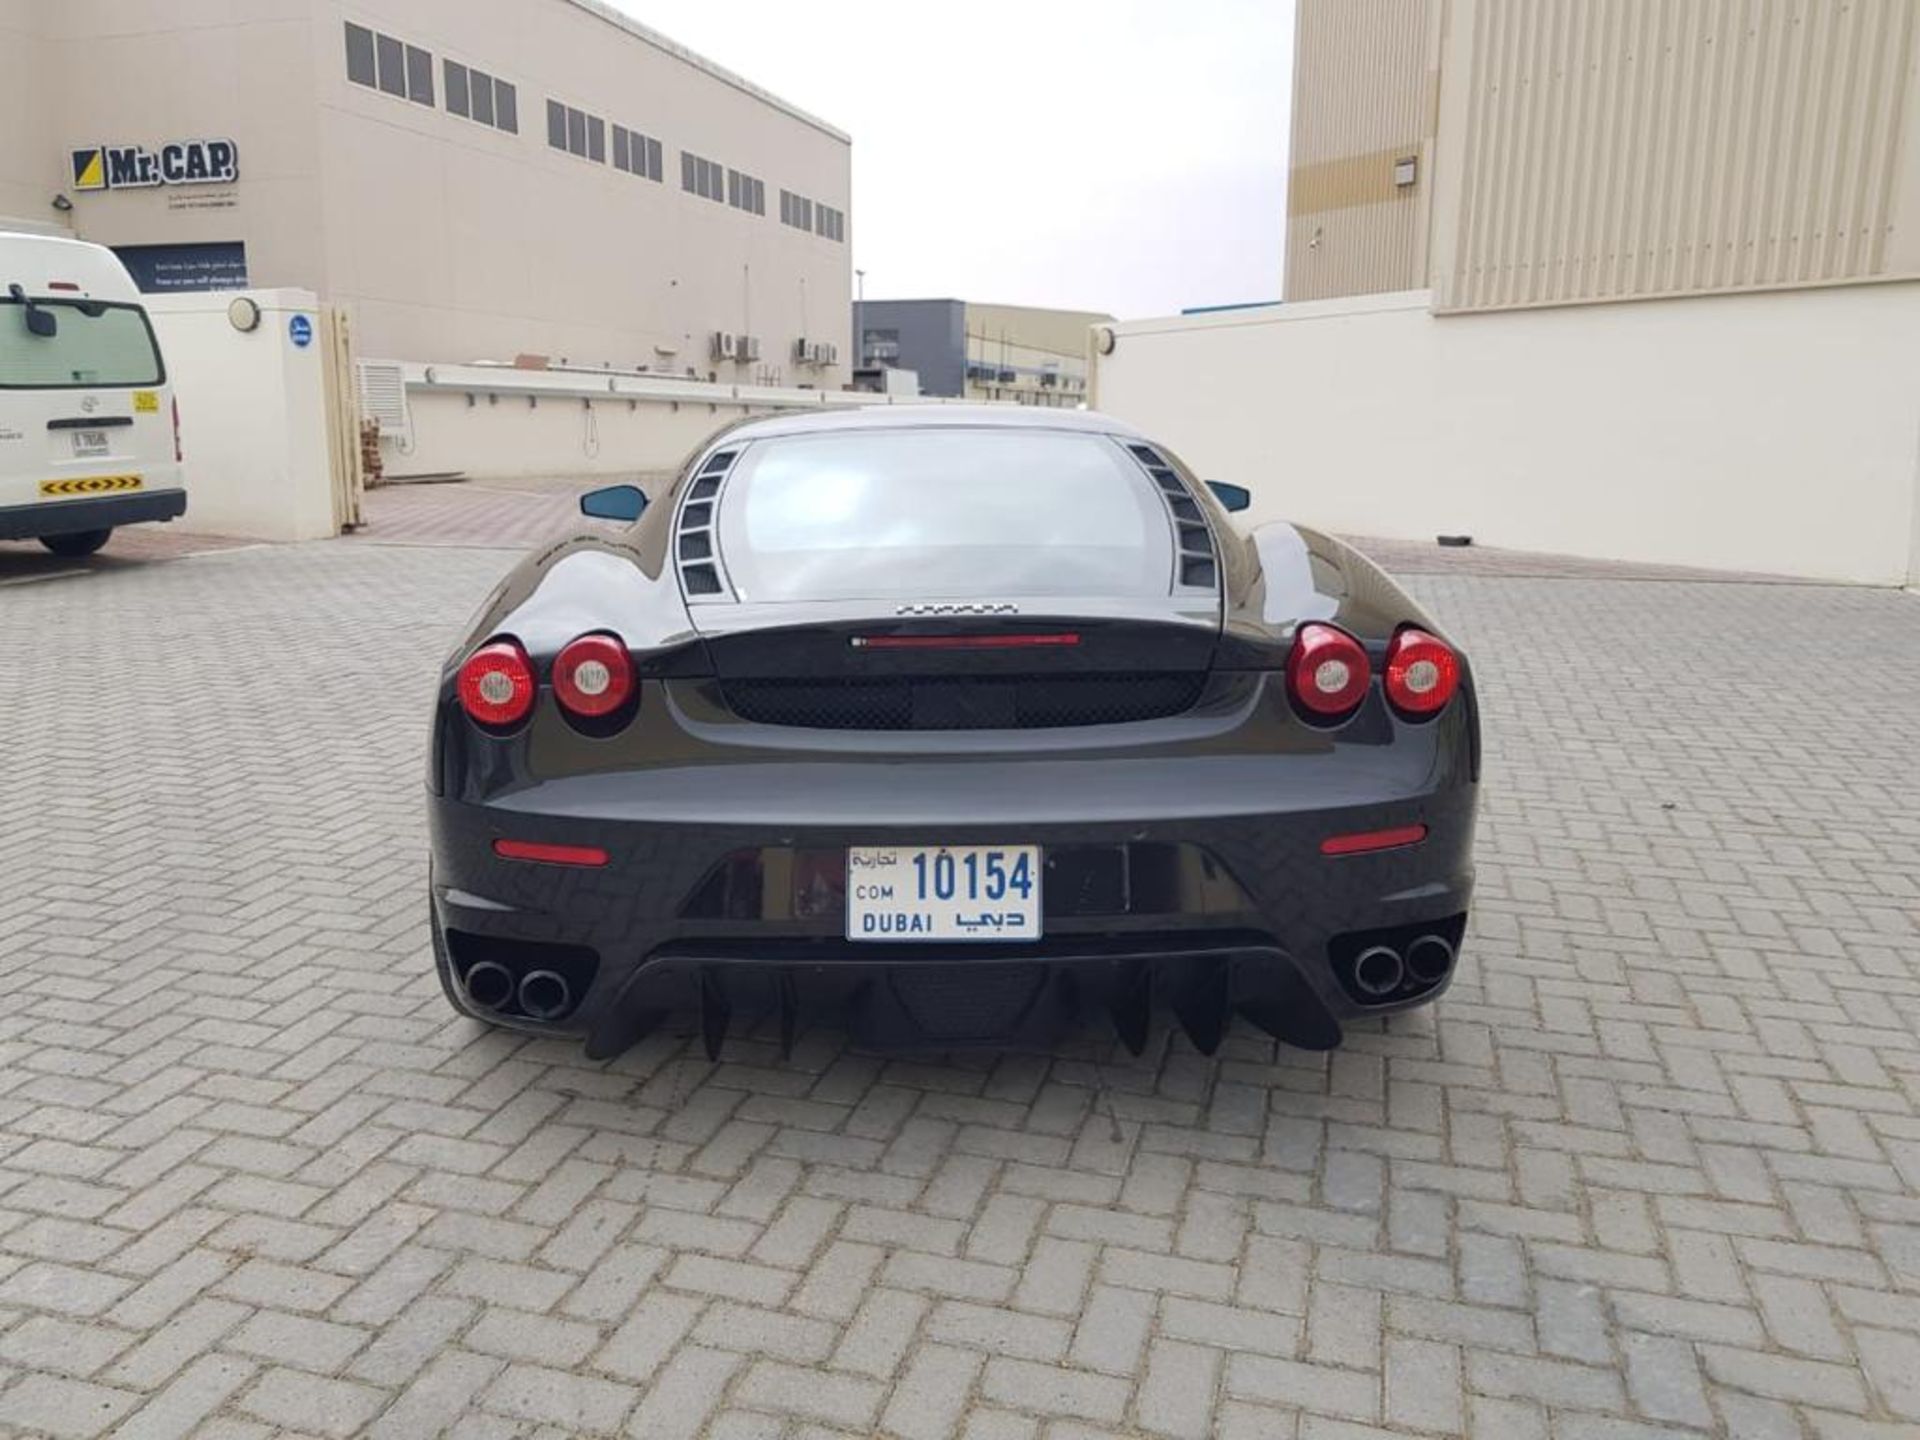 2007 FERRARI F430 BLACK 2 DOOR COUPE 4.3L AUTOMATIC LHD, PERFECT CONDITION INSIDE AND OUT - Image 7 of 13